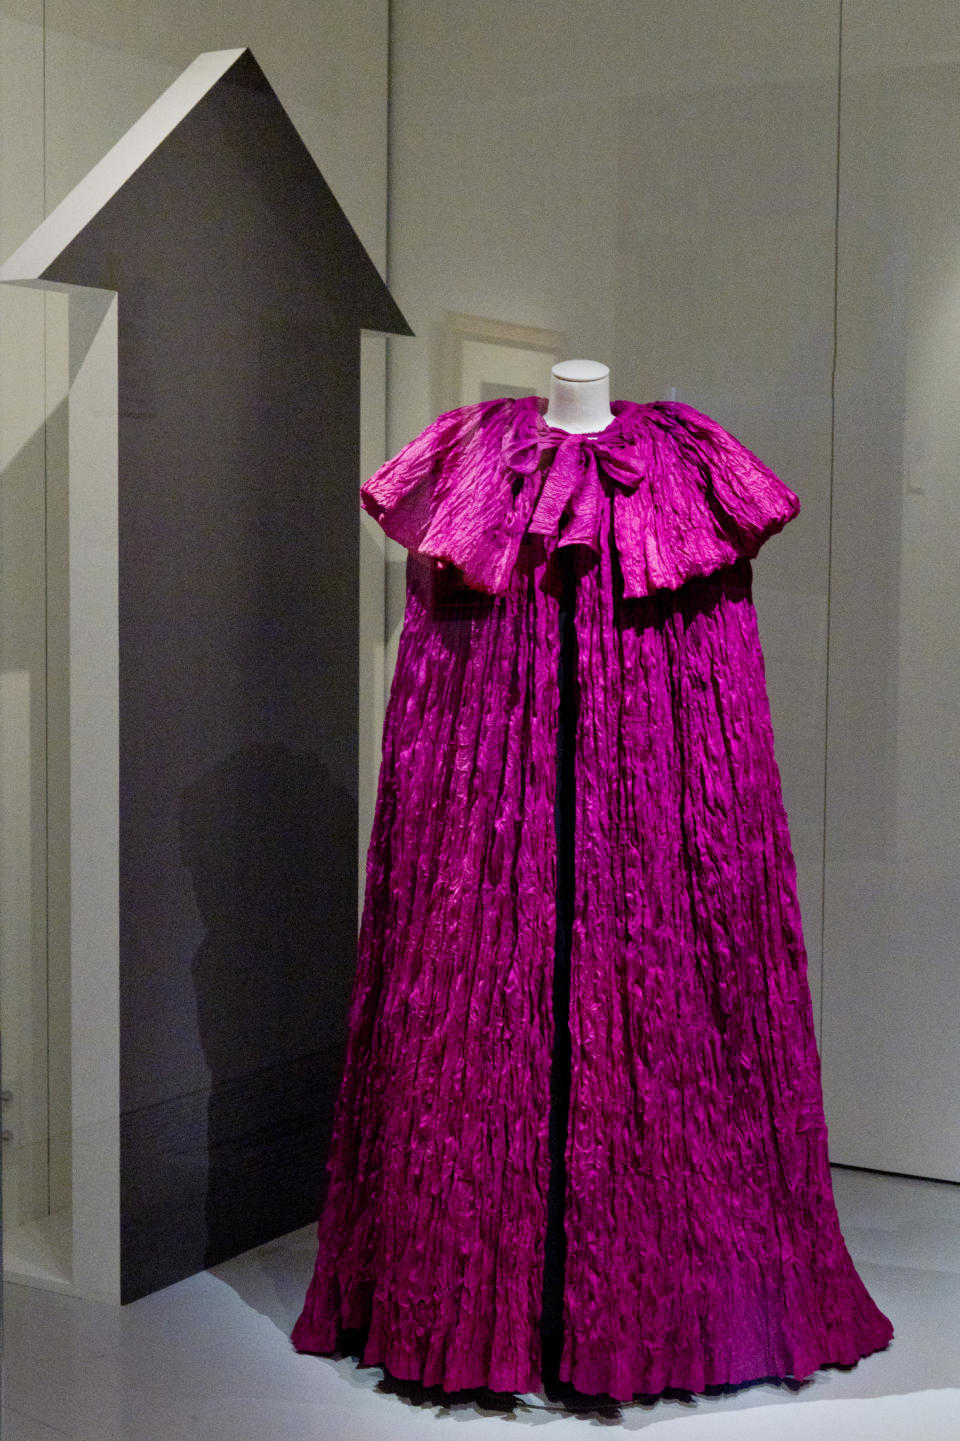 A shocking pink cape from 1951 in the Schiaparelli exhibition at the Musée des Arts Décoratifs.